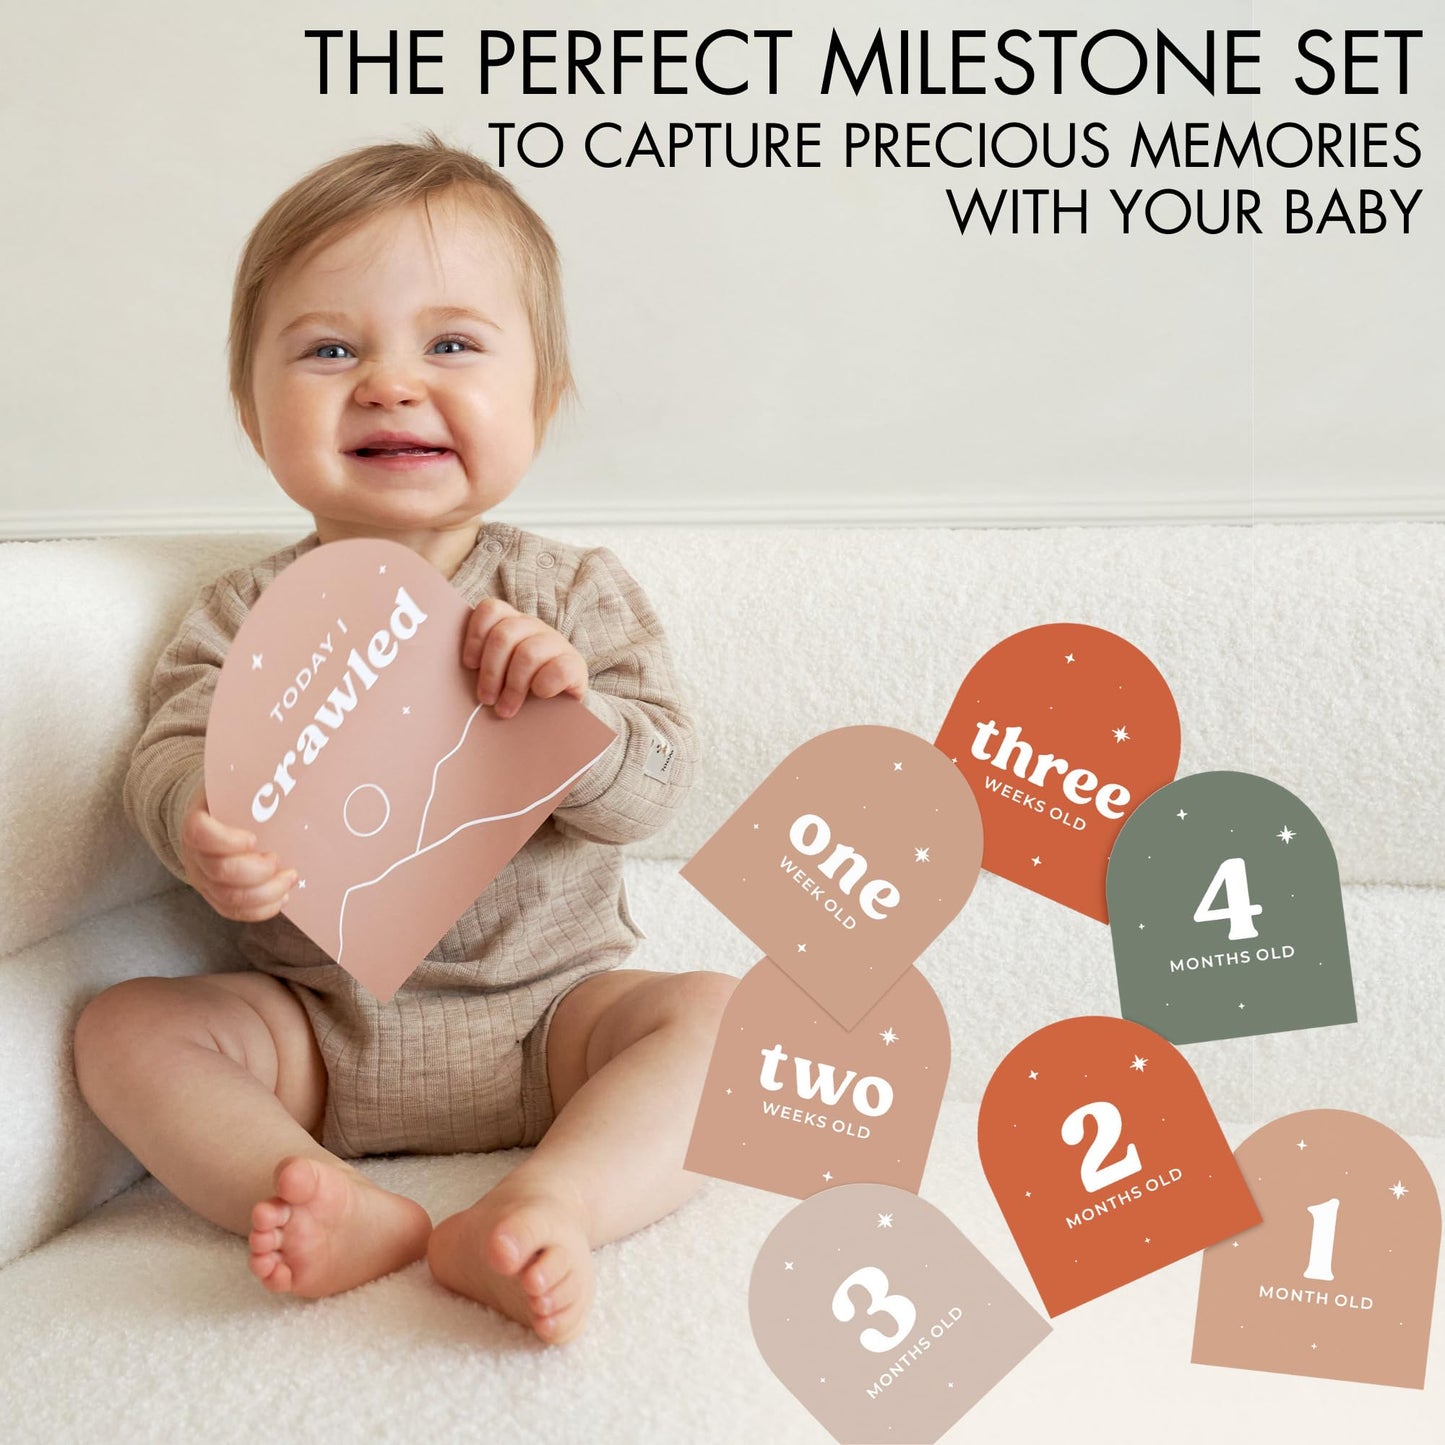 Beautiful Baby Monthly Milestone Cards - The Perfect Cards for Adorable Milestone Pictures of Your Newborn Boy/Girl - 15 Reversible Paper Cards incl. Welcome Home & Hello World Sign are A Great Gift